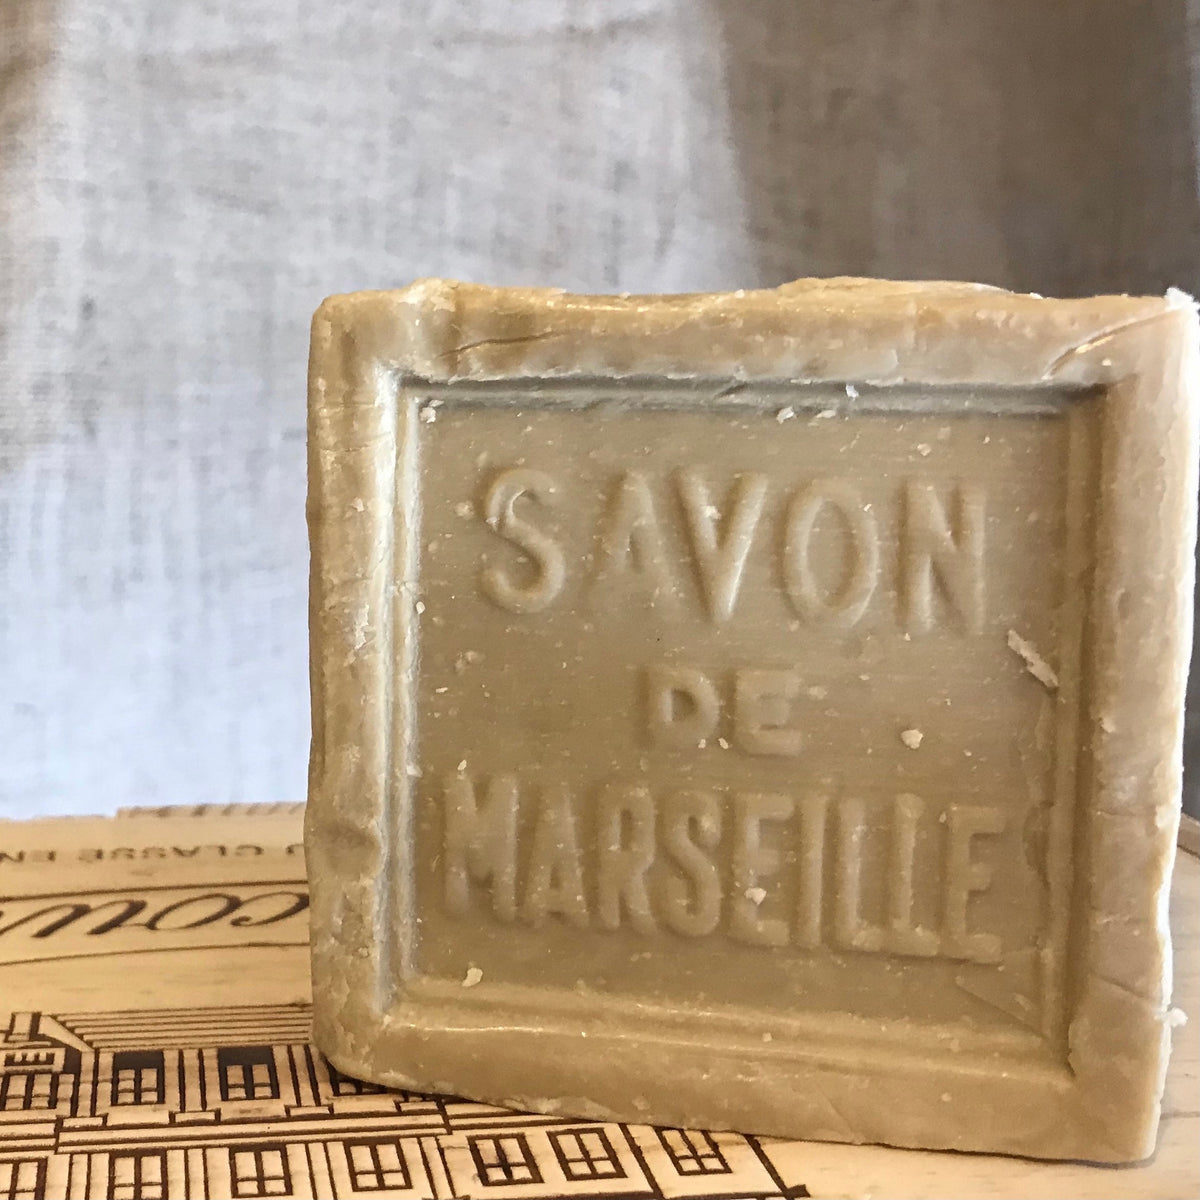 300g Fer a Cheval French Soap Cube with Olive Oil 72%